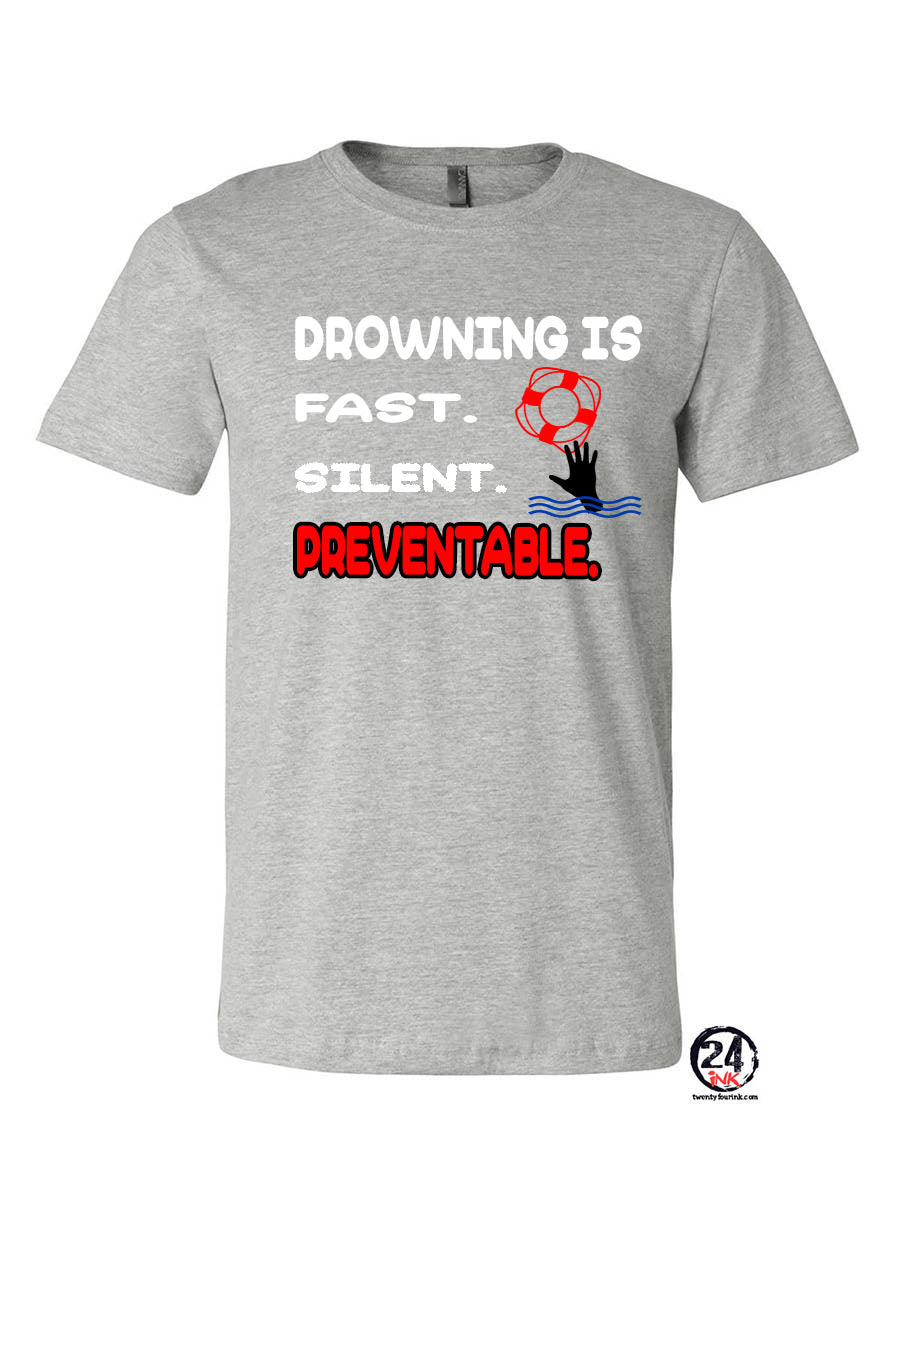 Water Safety Event T-Shirt